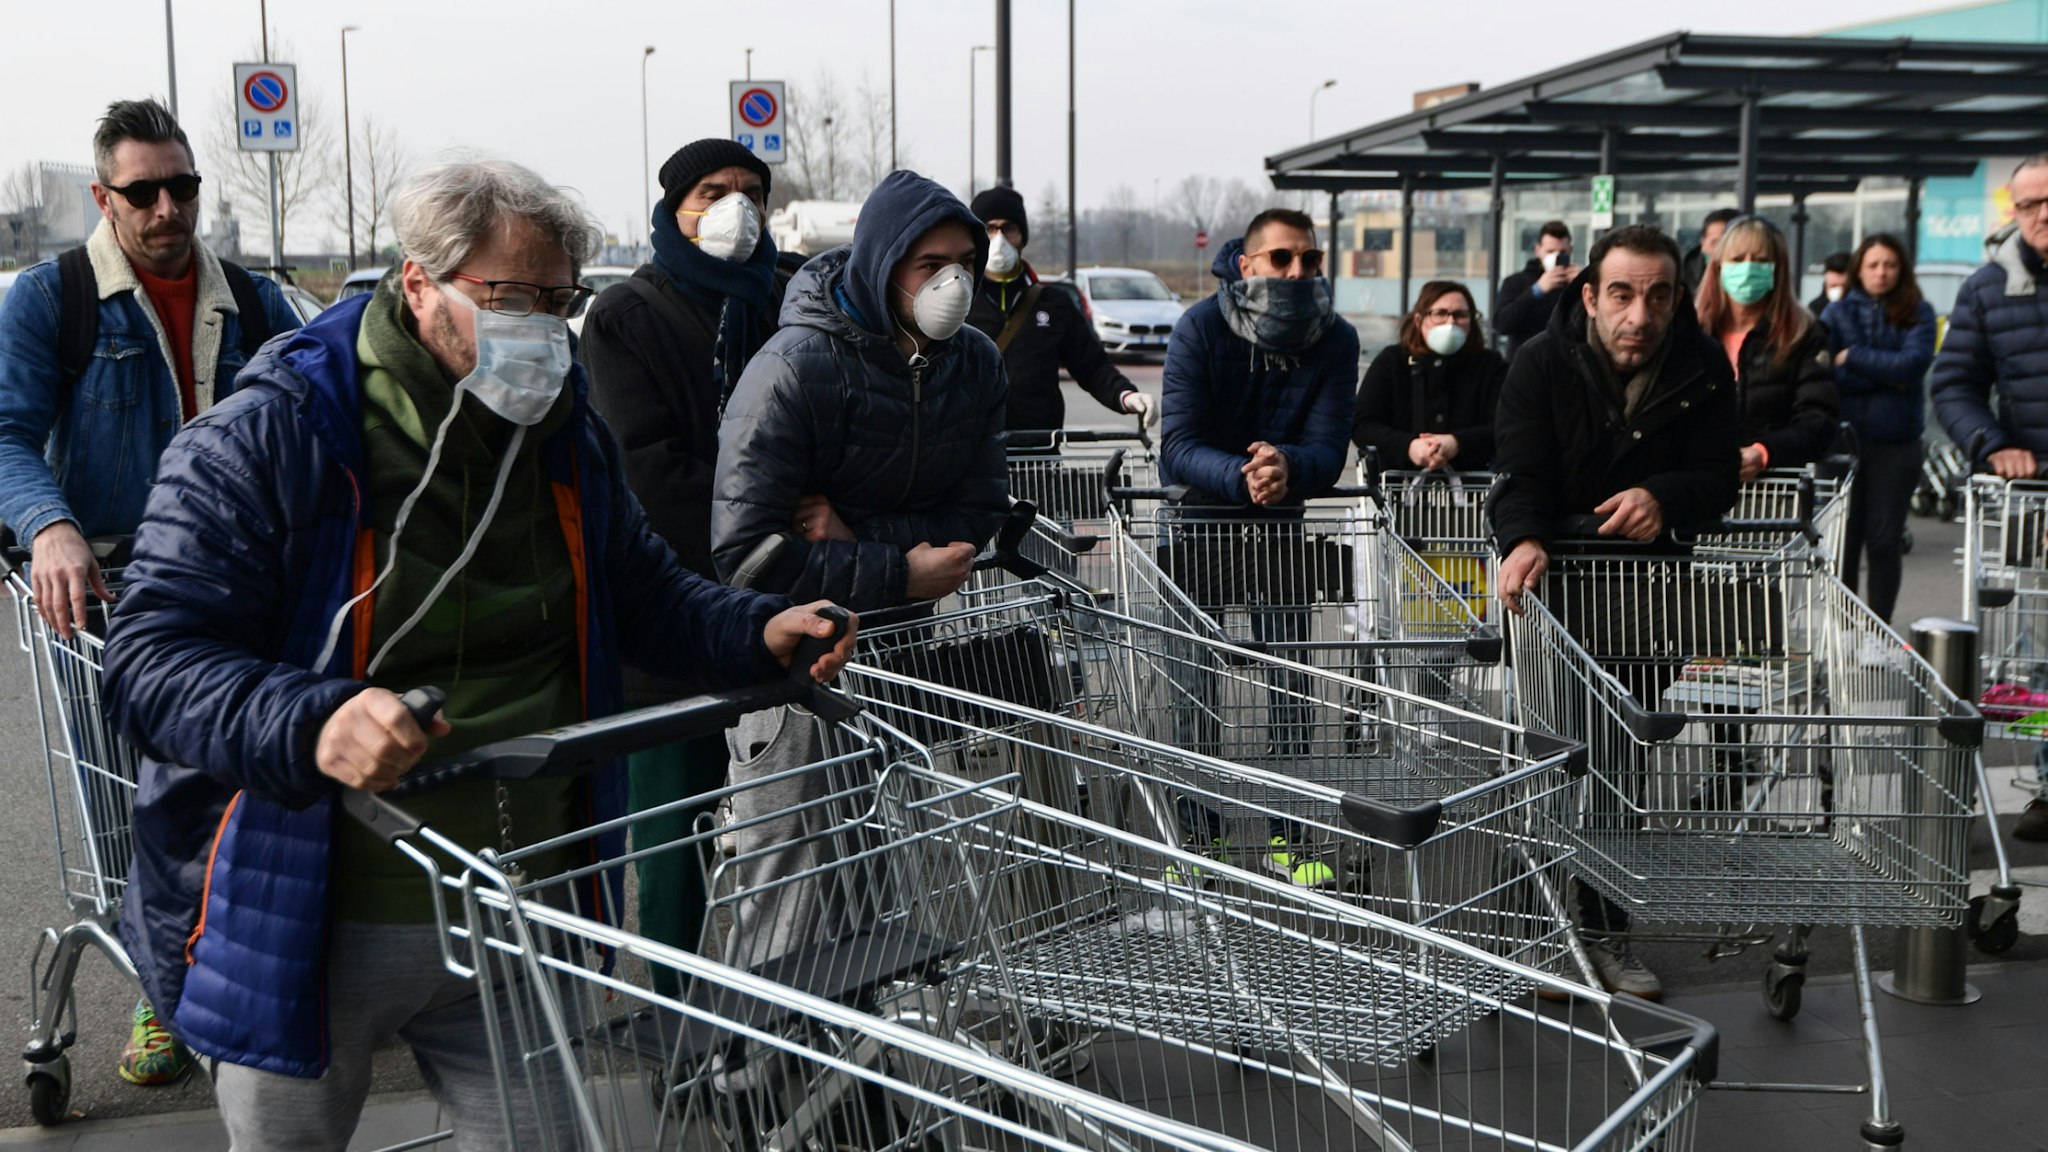 Residents wait to be given access to shop in a supermarket in small groups of forty people on February 23, 2020 in the small Italian town of Casalpusterlengo, under the shadow of a new coronavirus outbreak, as Italy took drastic containment steps as worldwide fears over the epidemic spiralled.